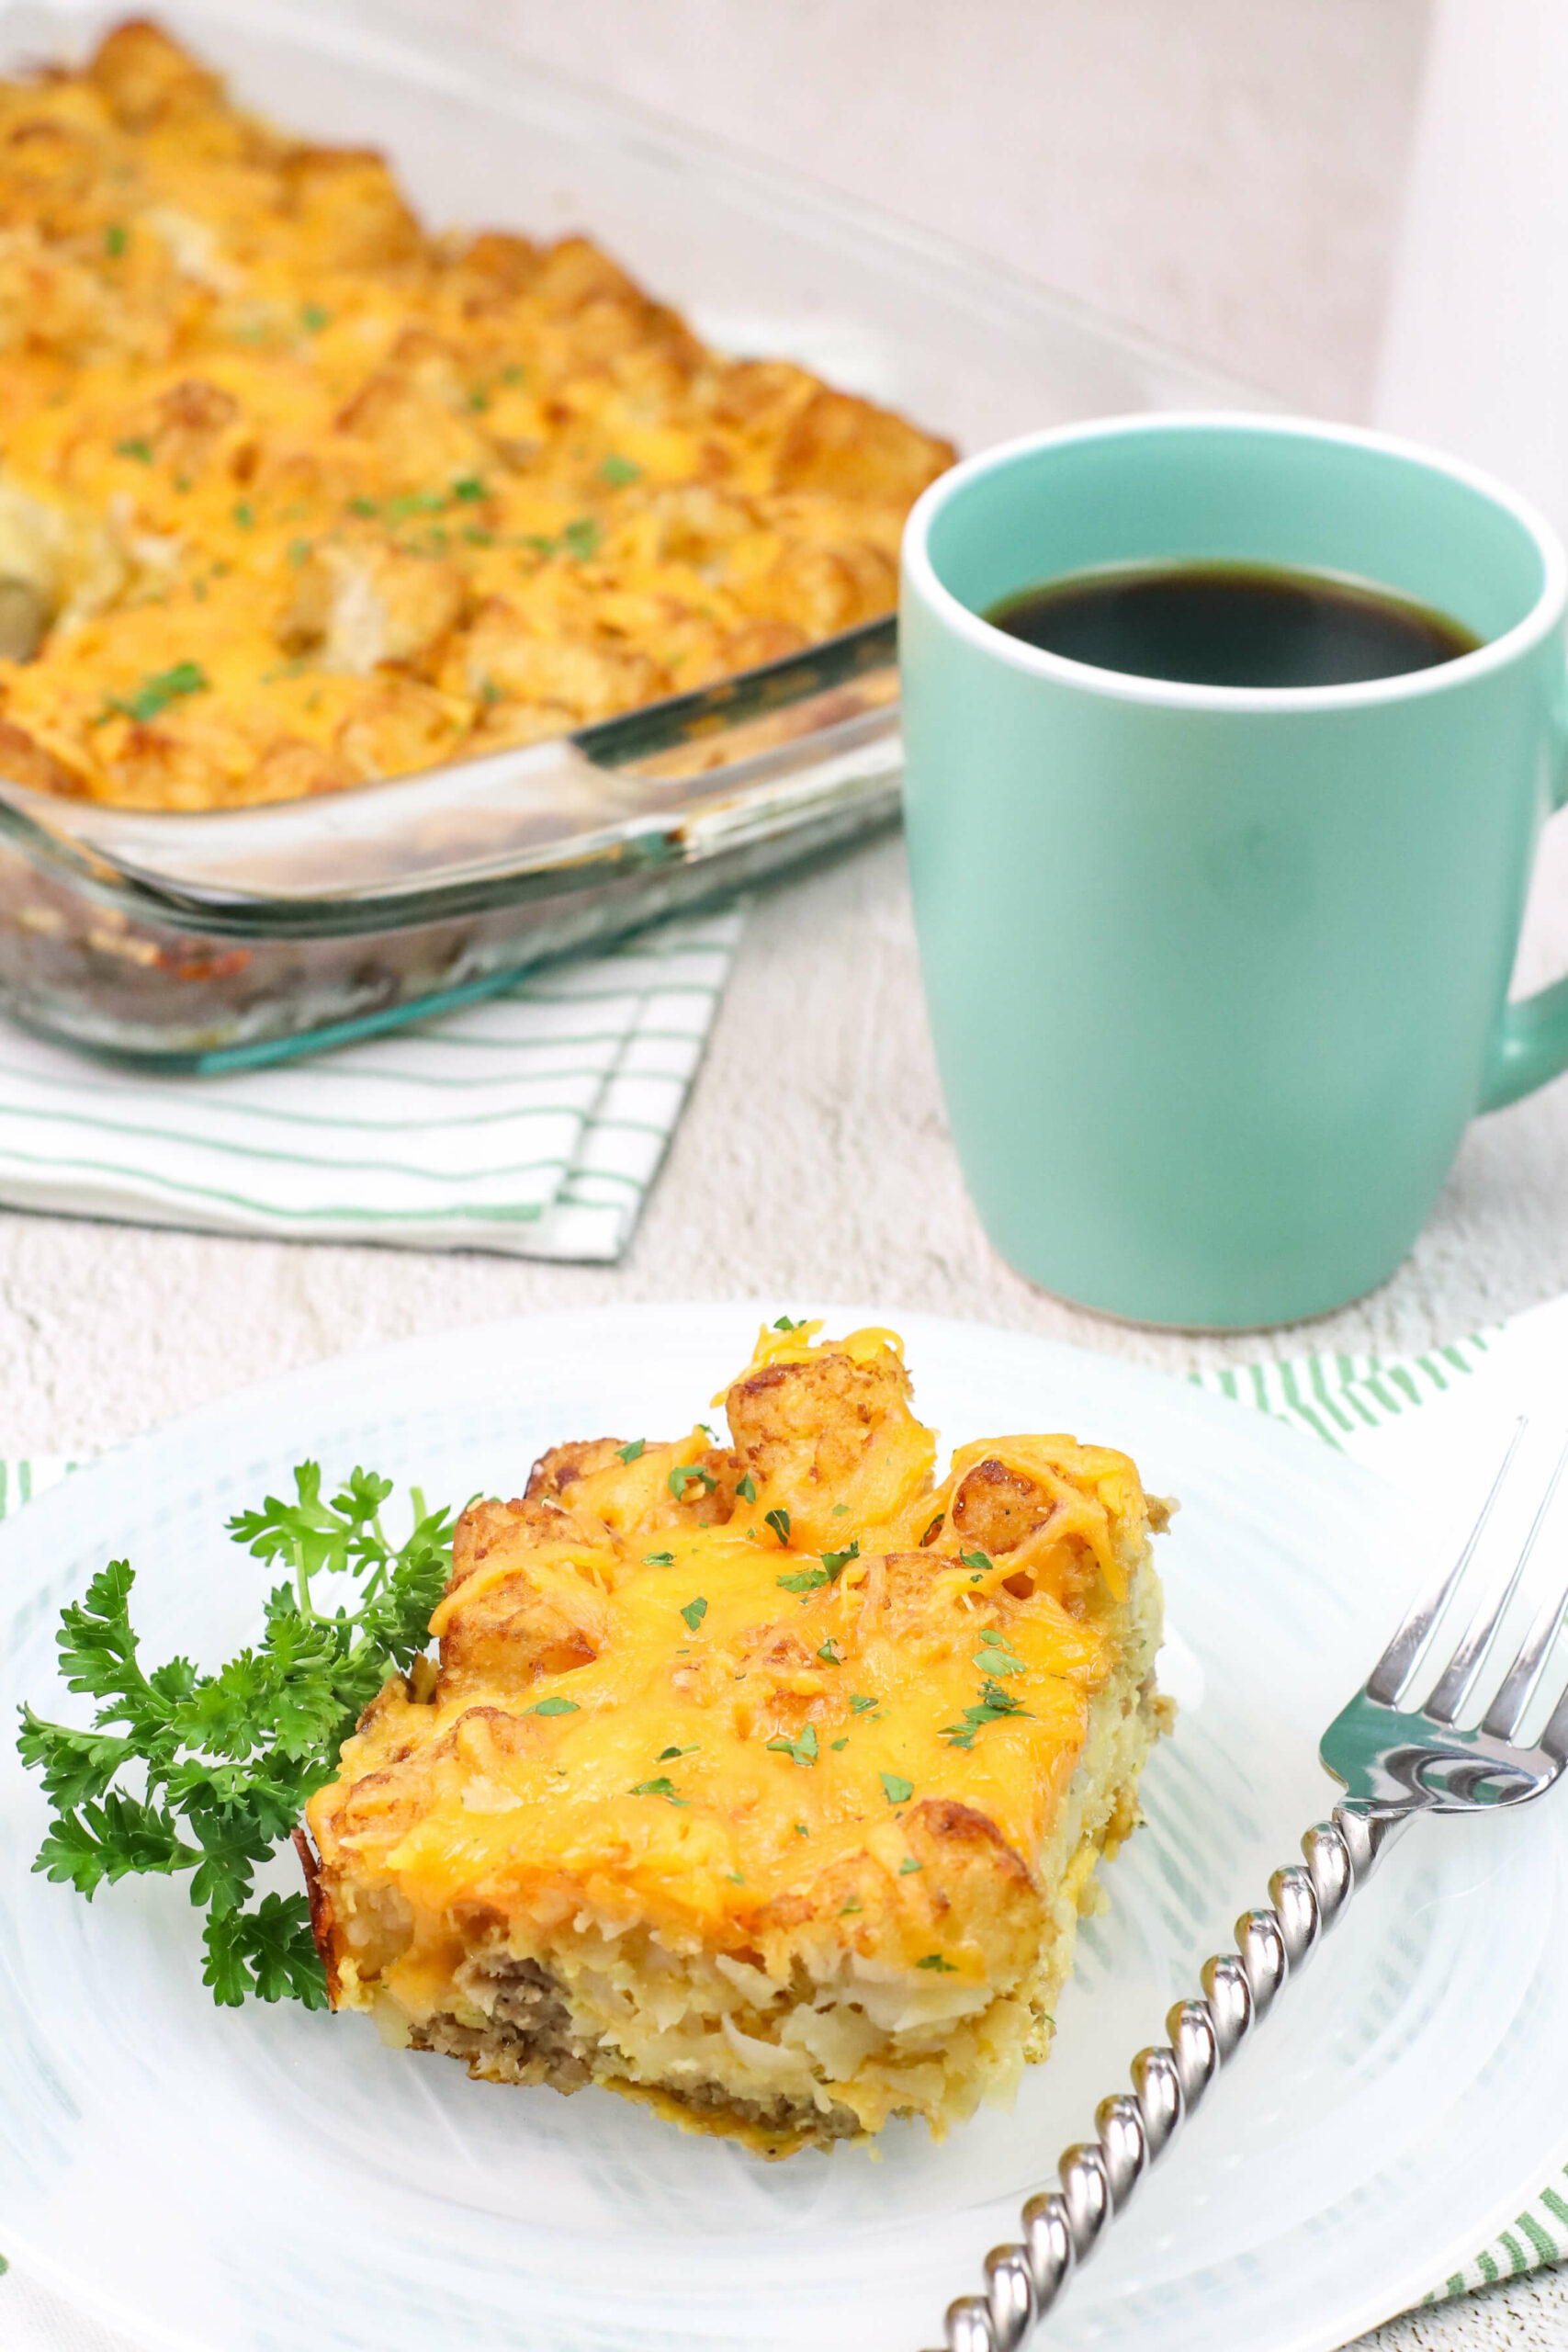 Tater Tot Sausage Breakfast Casserole with coffee.